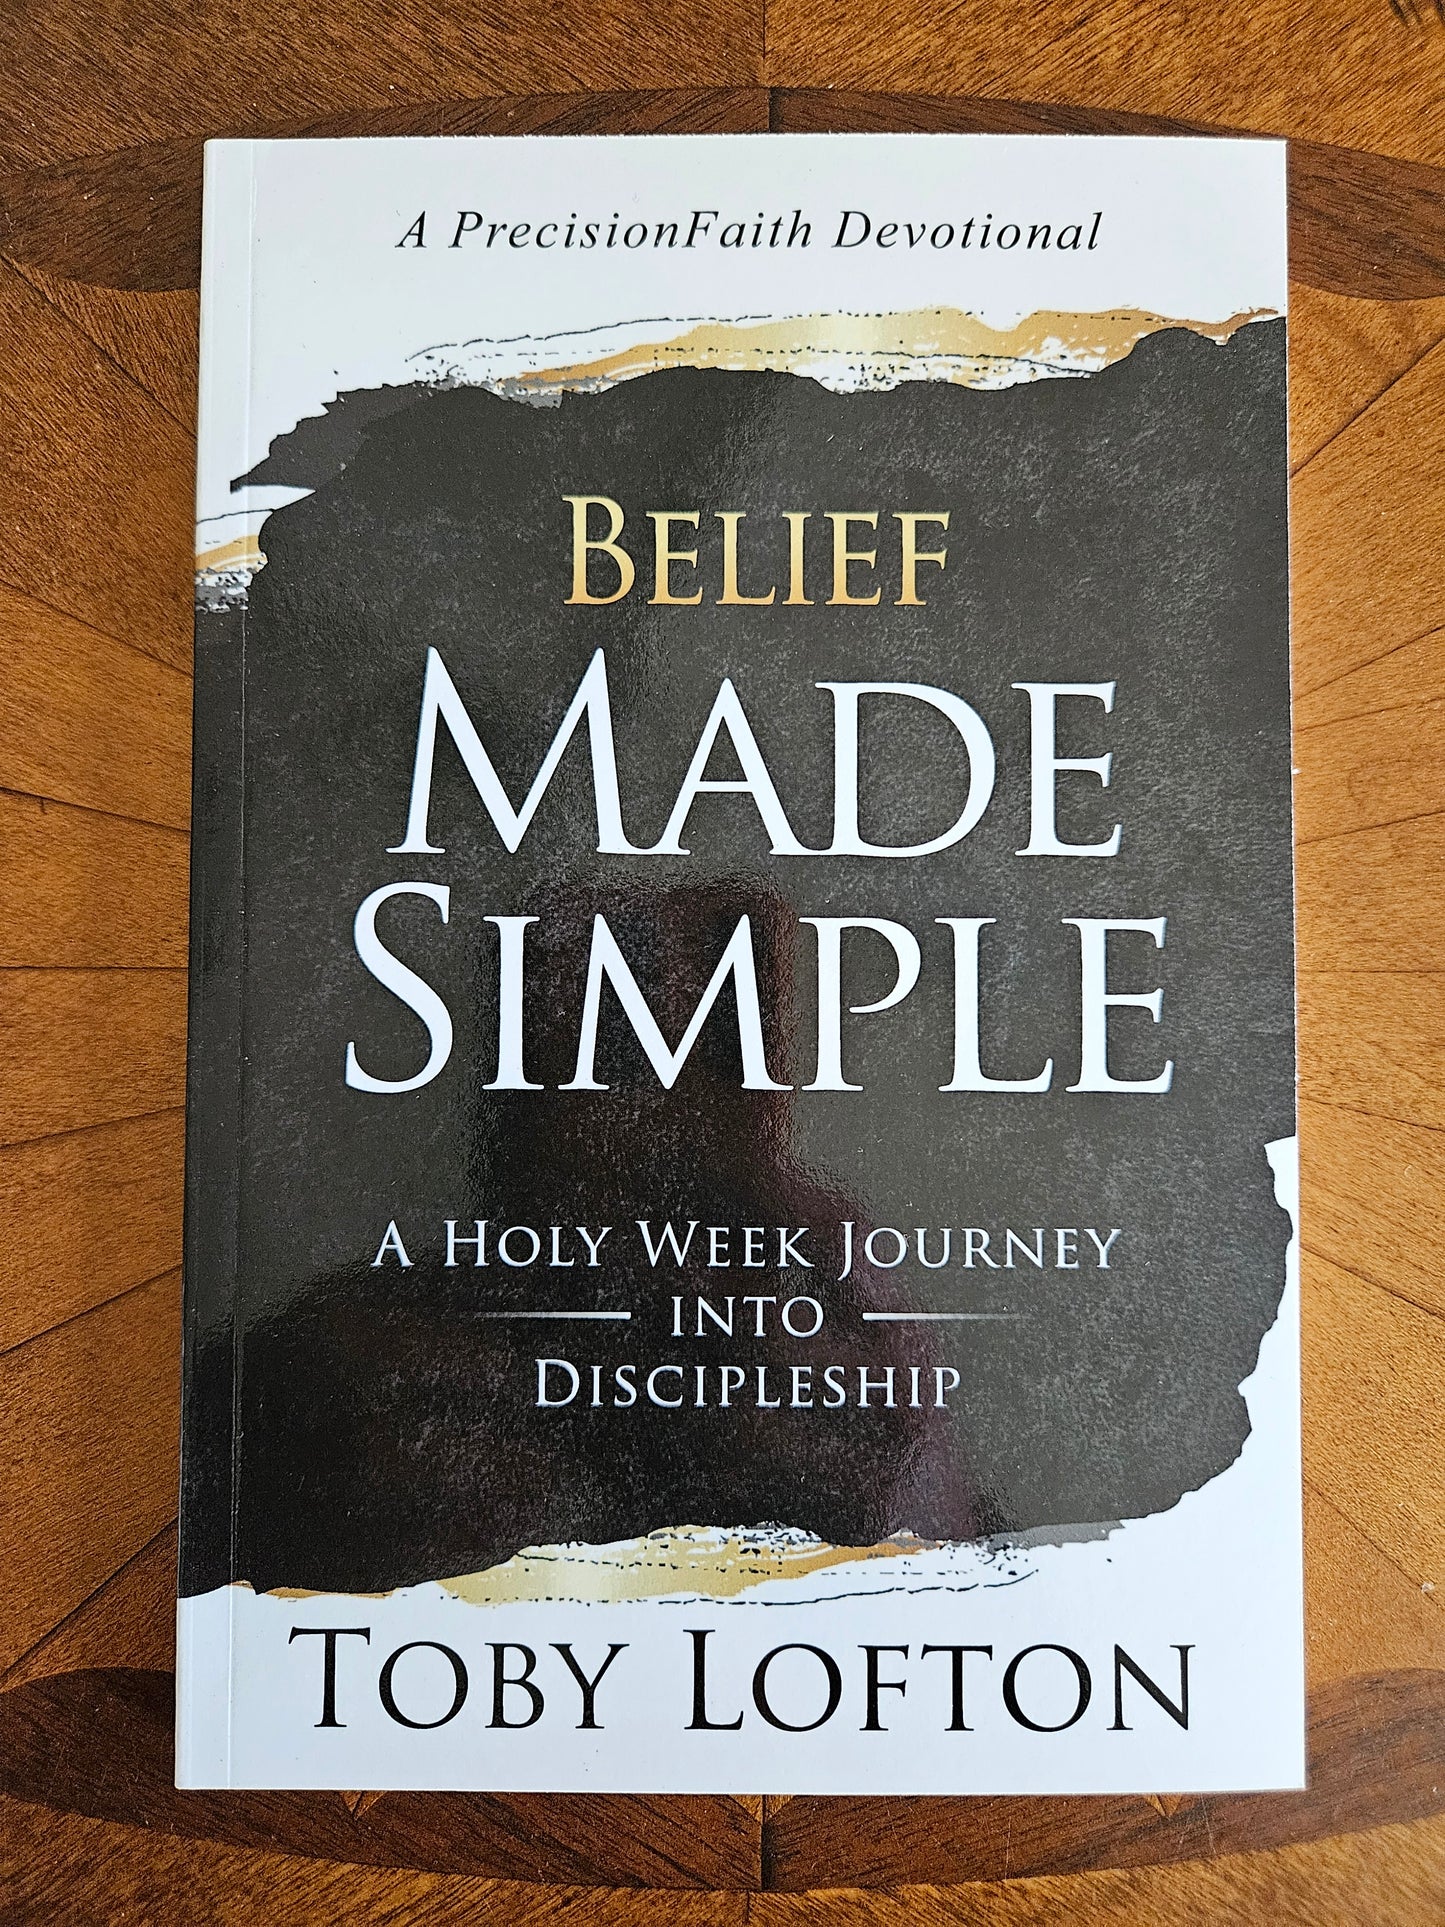 Belief Made Simple: A Holy Week Journey into Discipleship (Paperback)